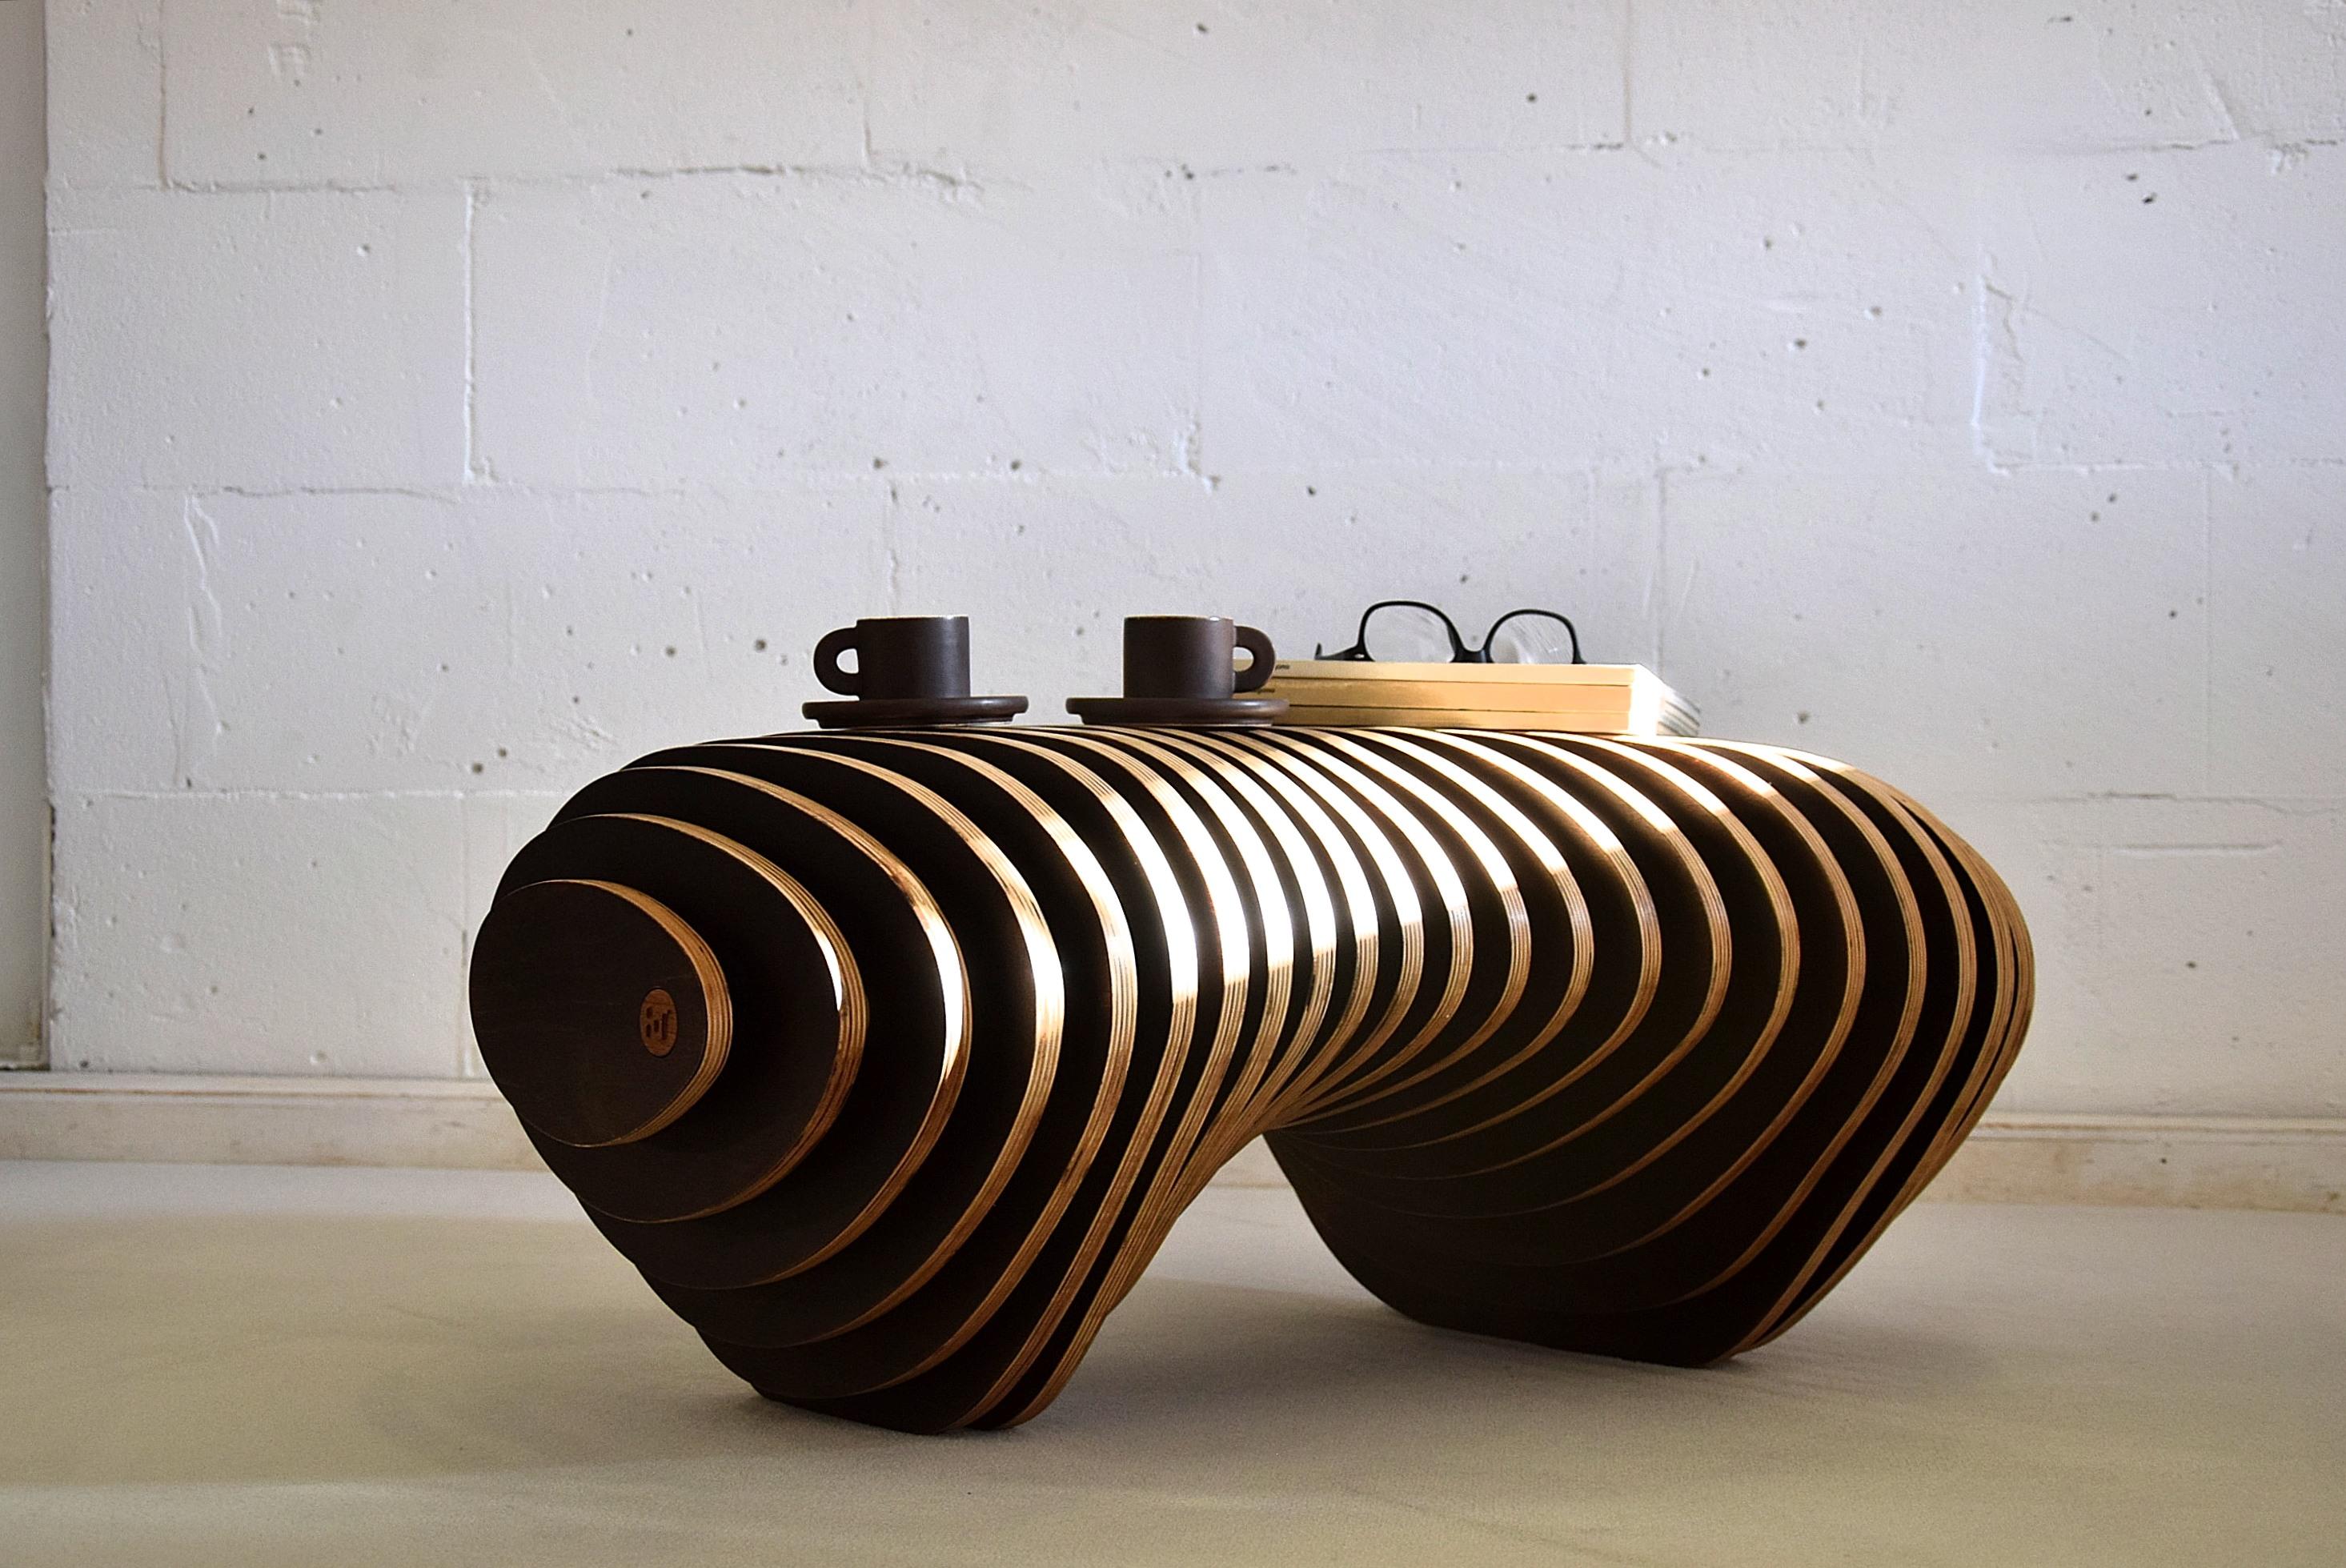 Organic coffee table / bench designed by the Italian architect Lorenzo Capanna and handmade in Italy.

Lorenzo Capanna is a very creative and talented architect who created this stunning piece.

Measurements: L.76 x D.62 x H.34 cm. L.29.921 x